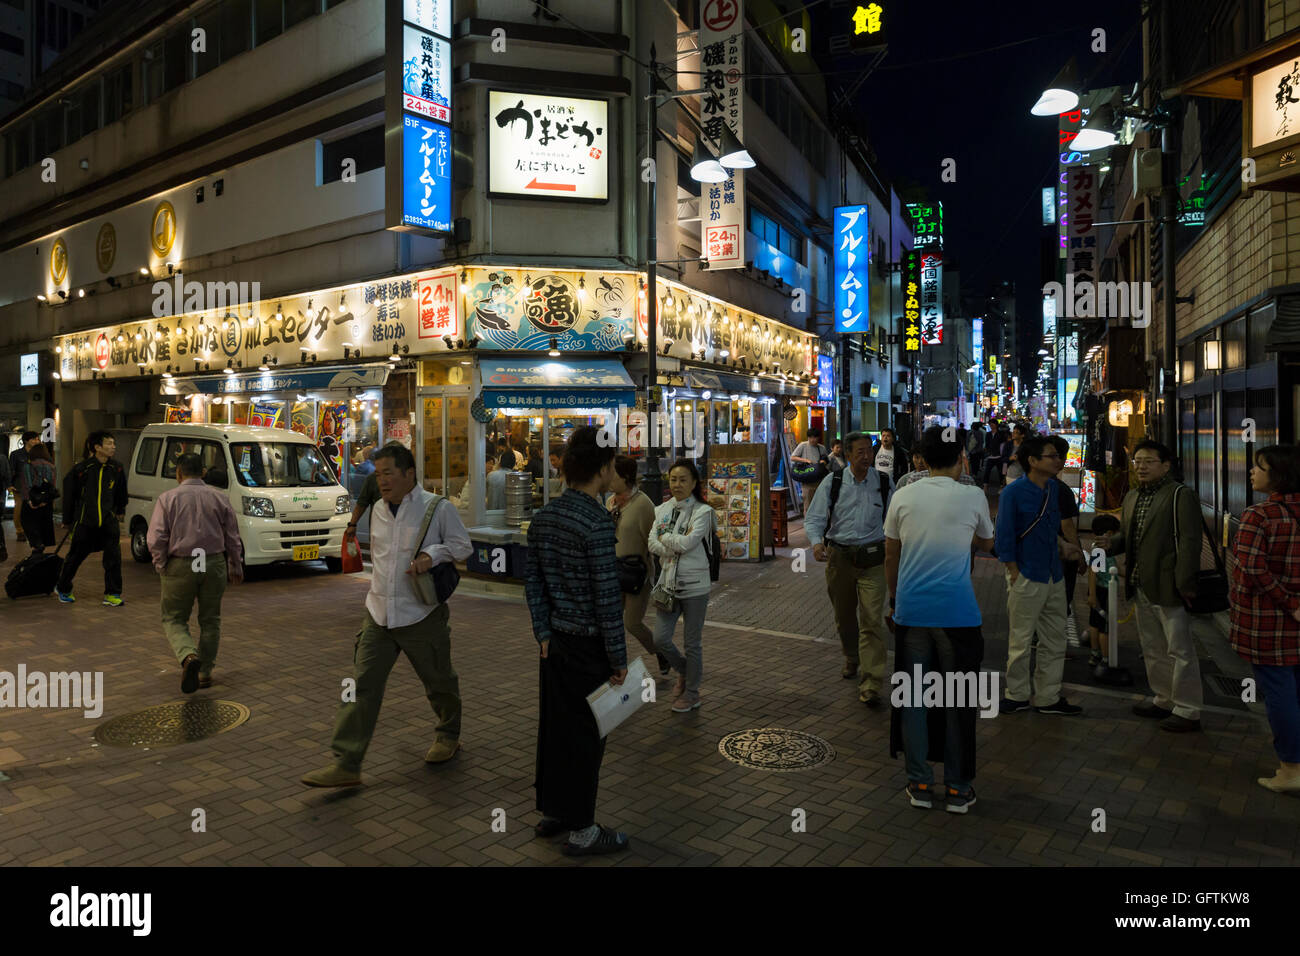 Nightlife with illuminated advertising in the side streets around the Ueno train station in Tokyo, Japan Stock Photo